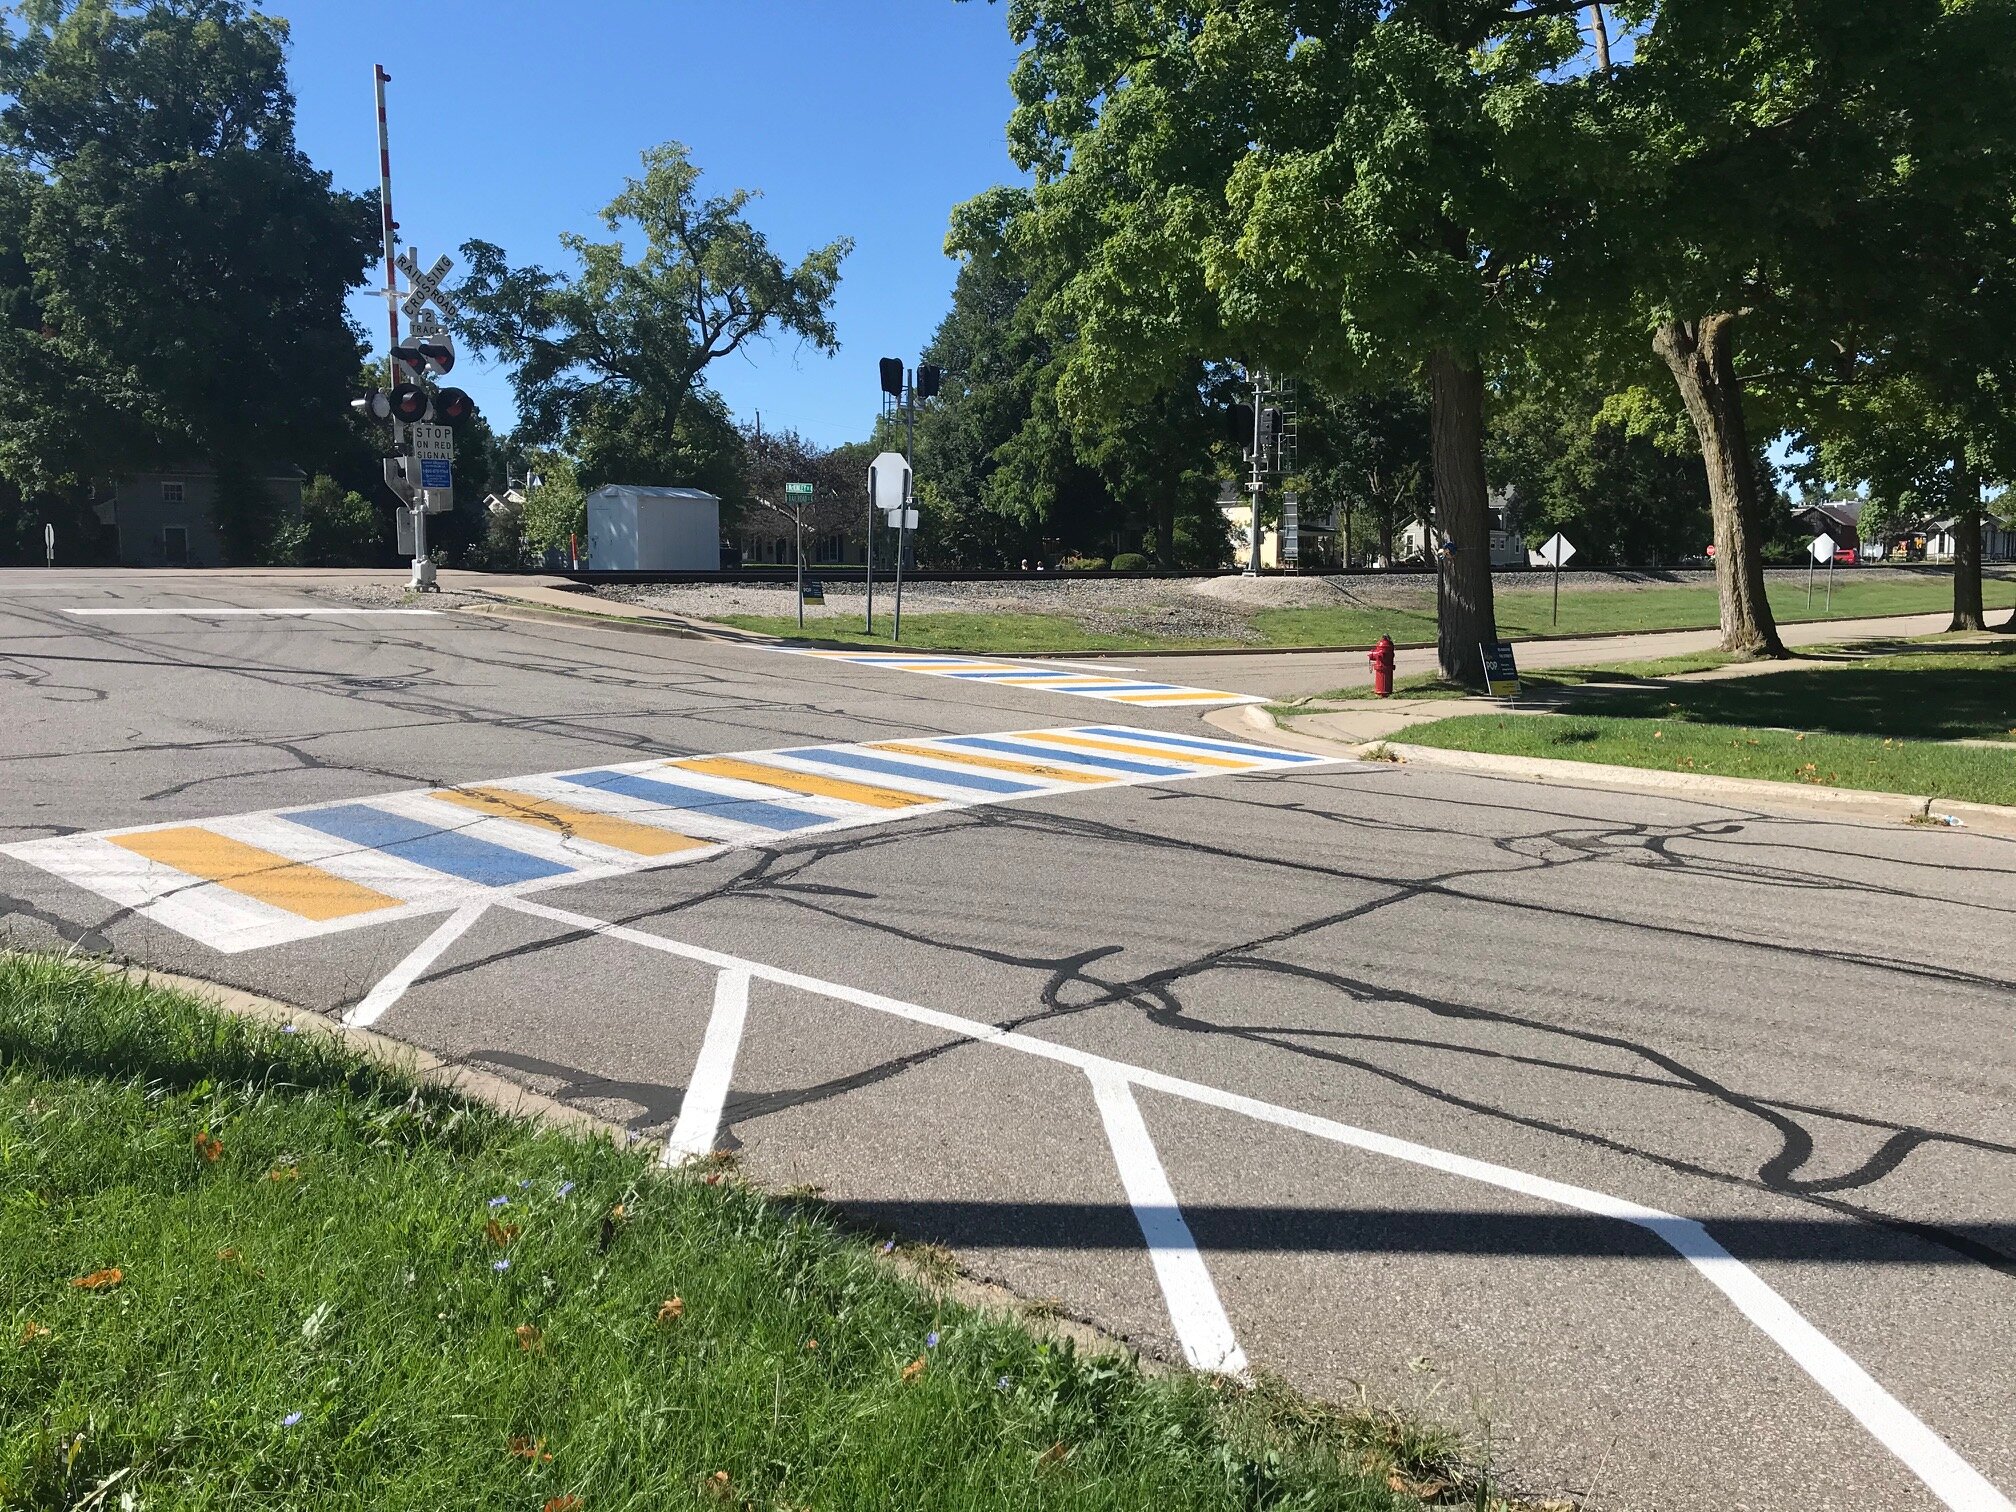  Painted curb extensions and crosswalks at the intersection of Railroad Street and McKinley Street. 